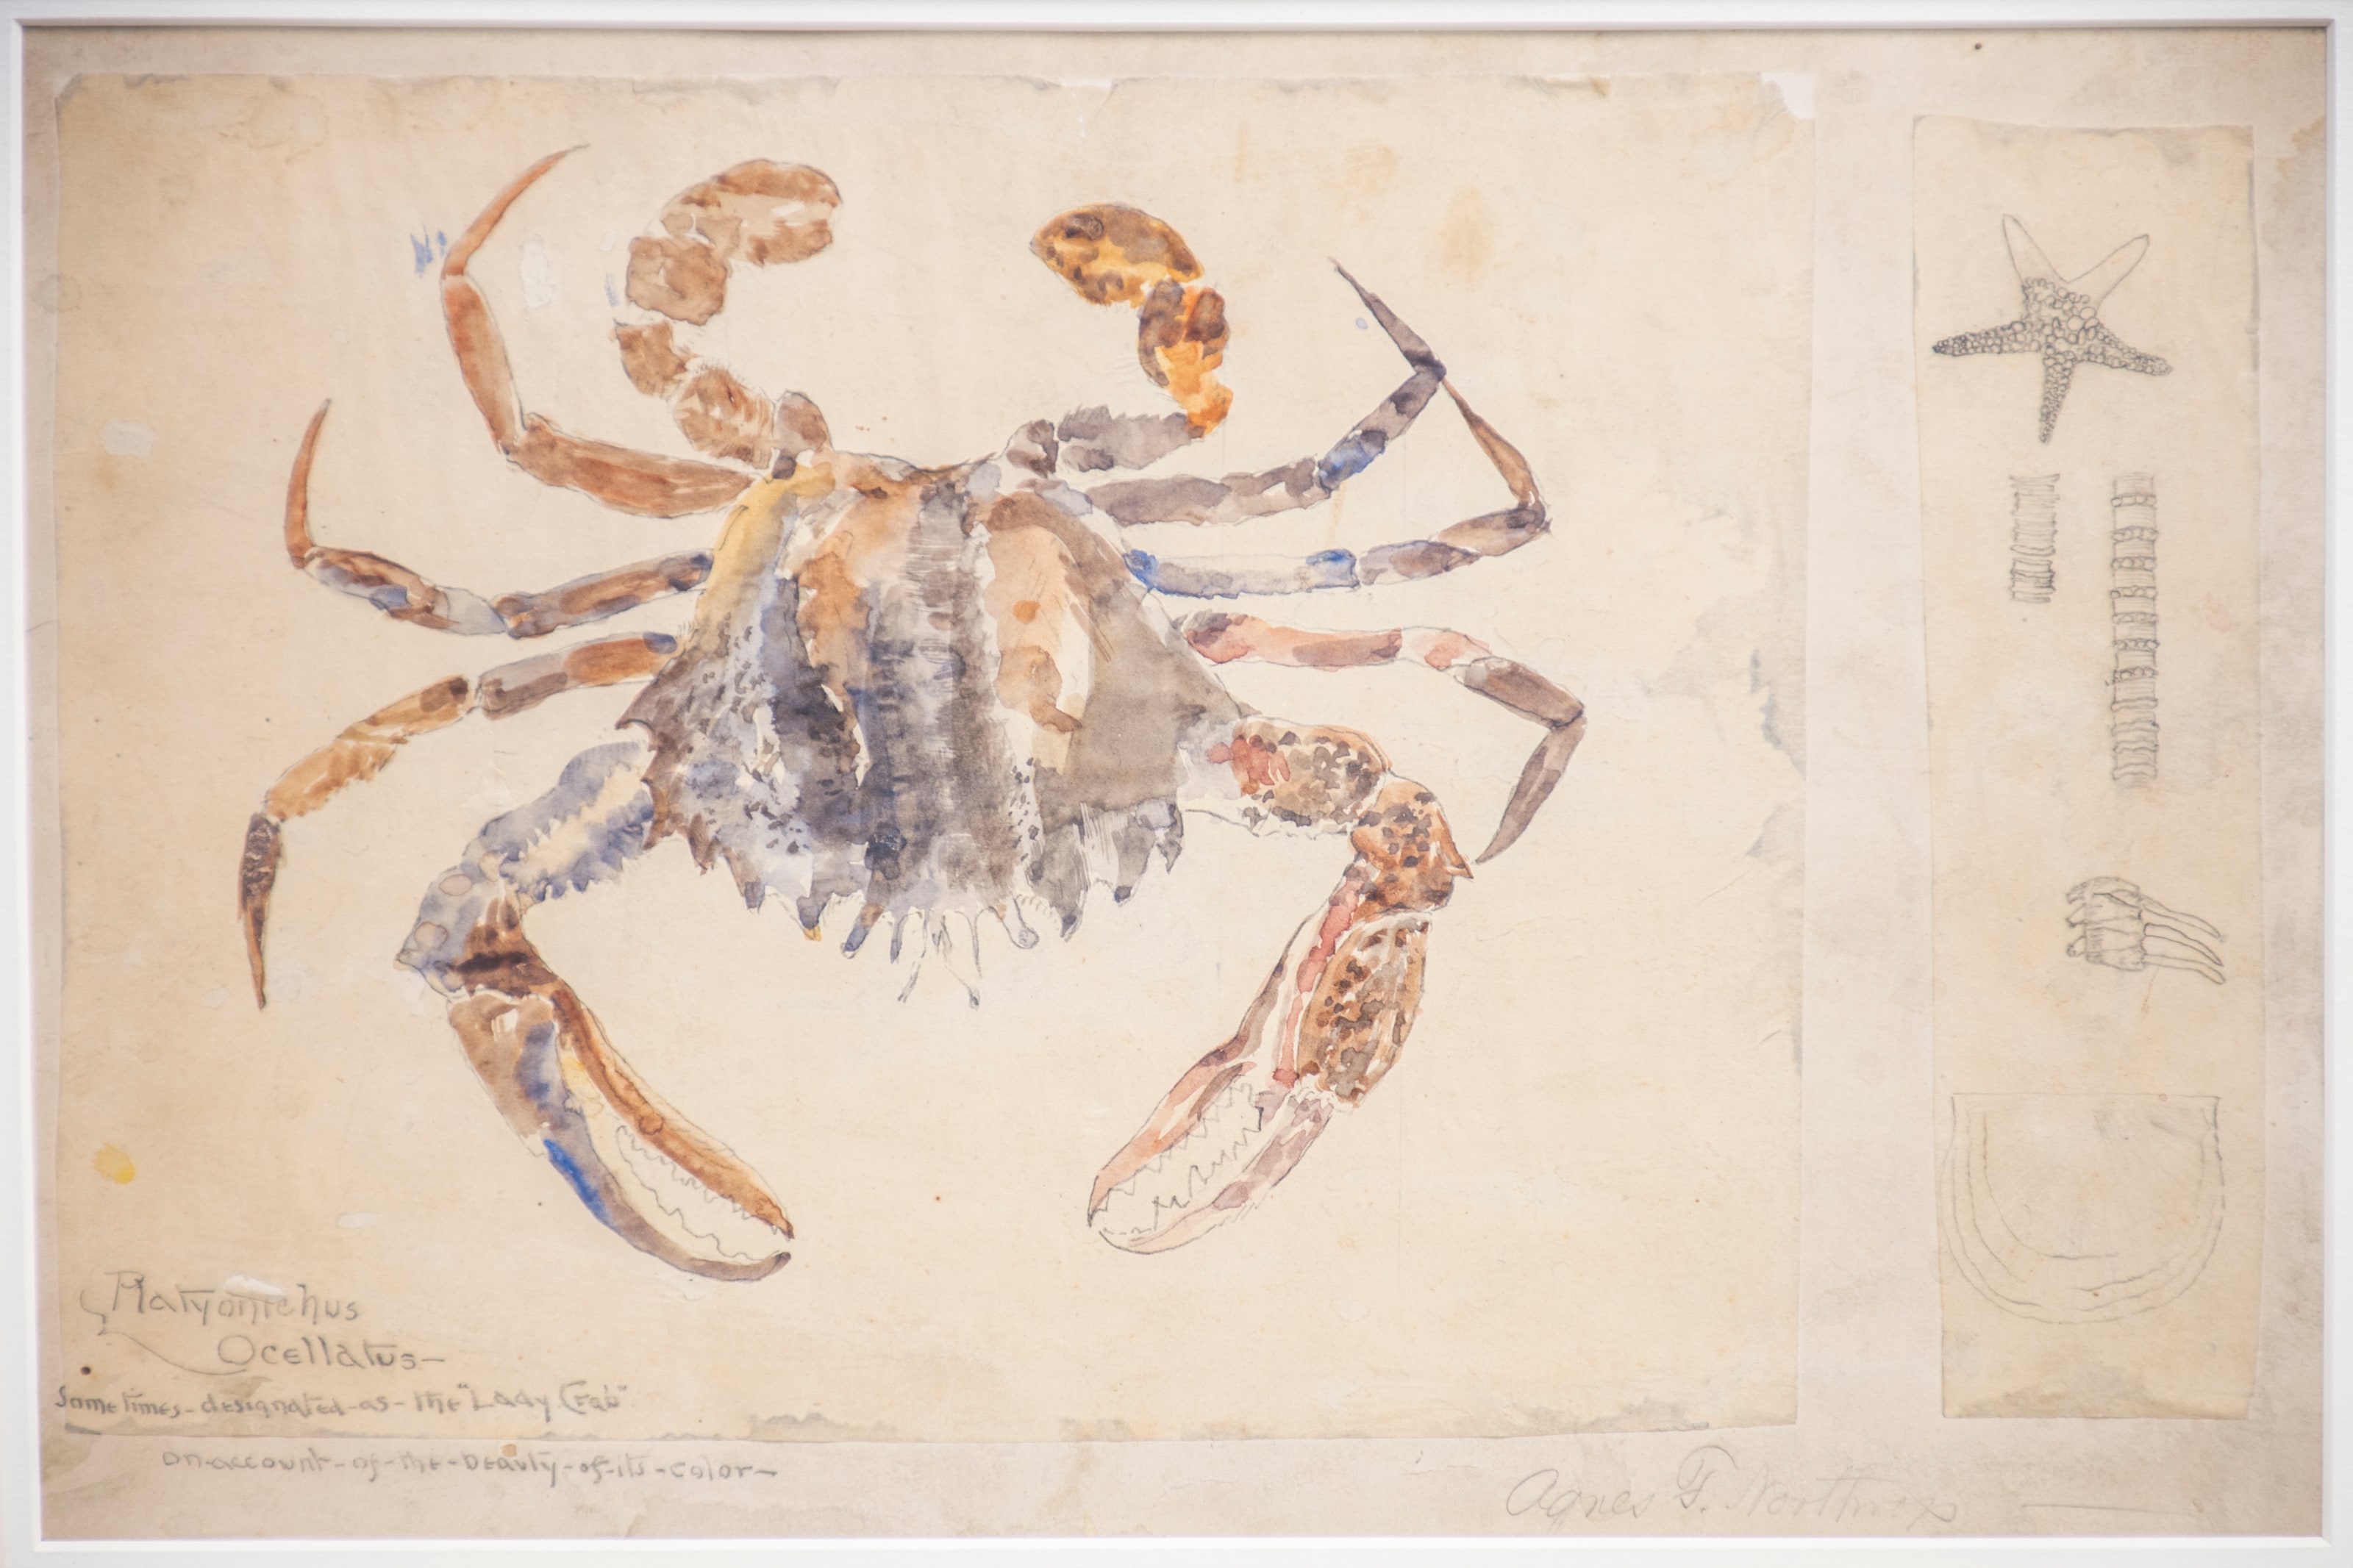 A closer look at the watercolor crab drawing by Agnes Northrop, showing delicate use of color and line.